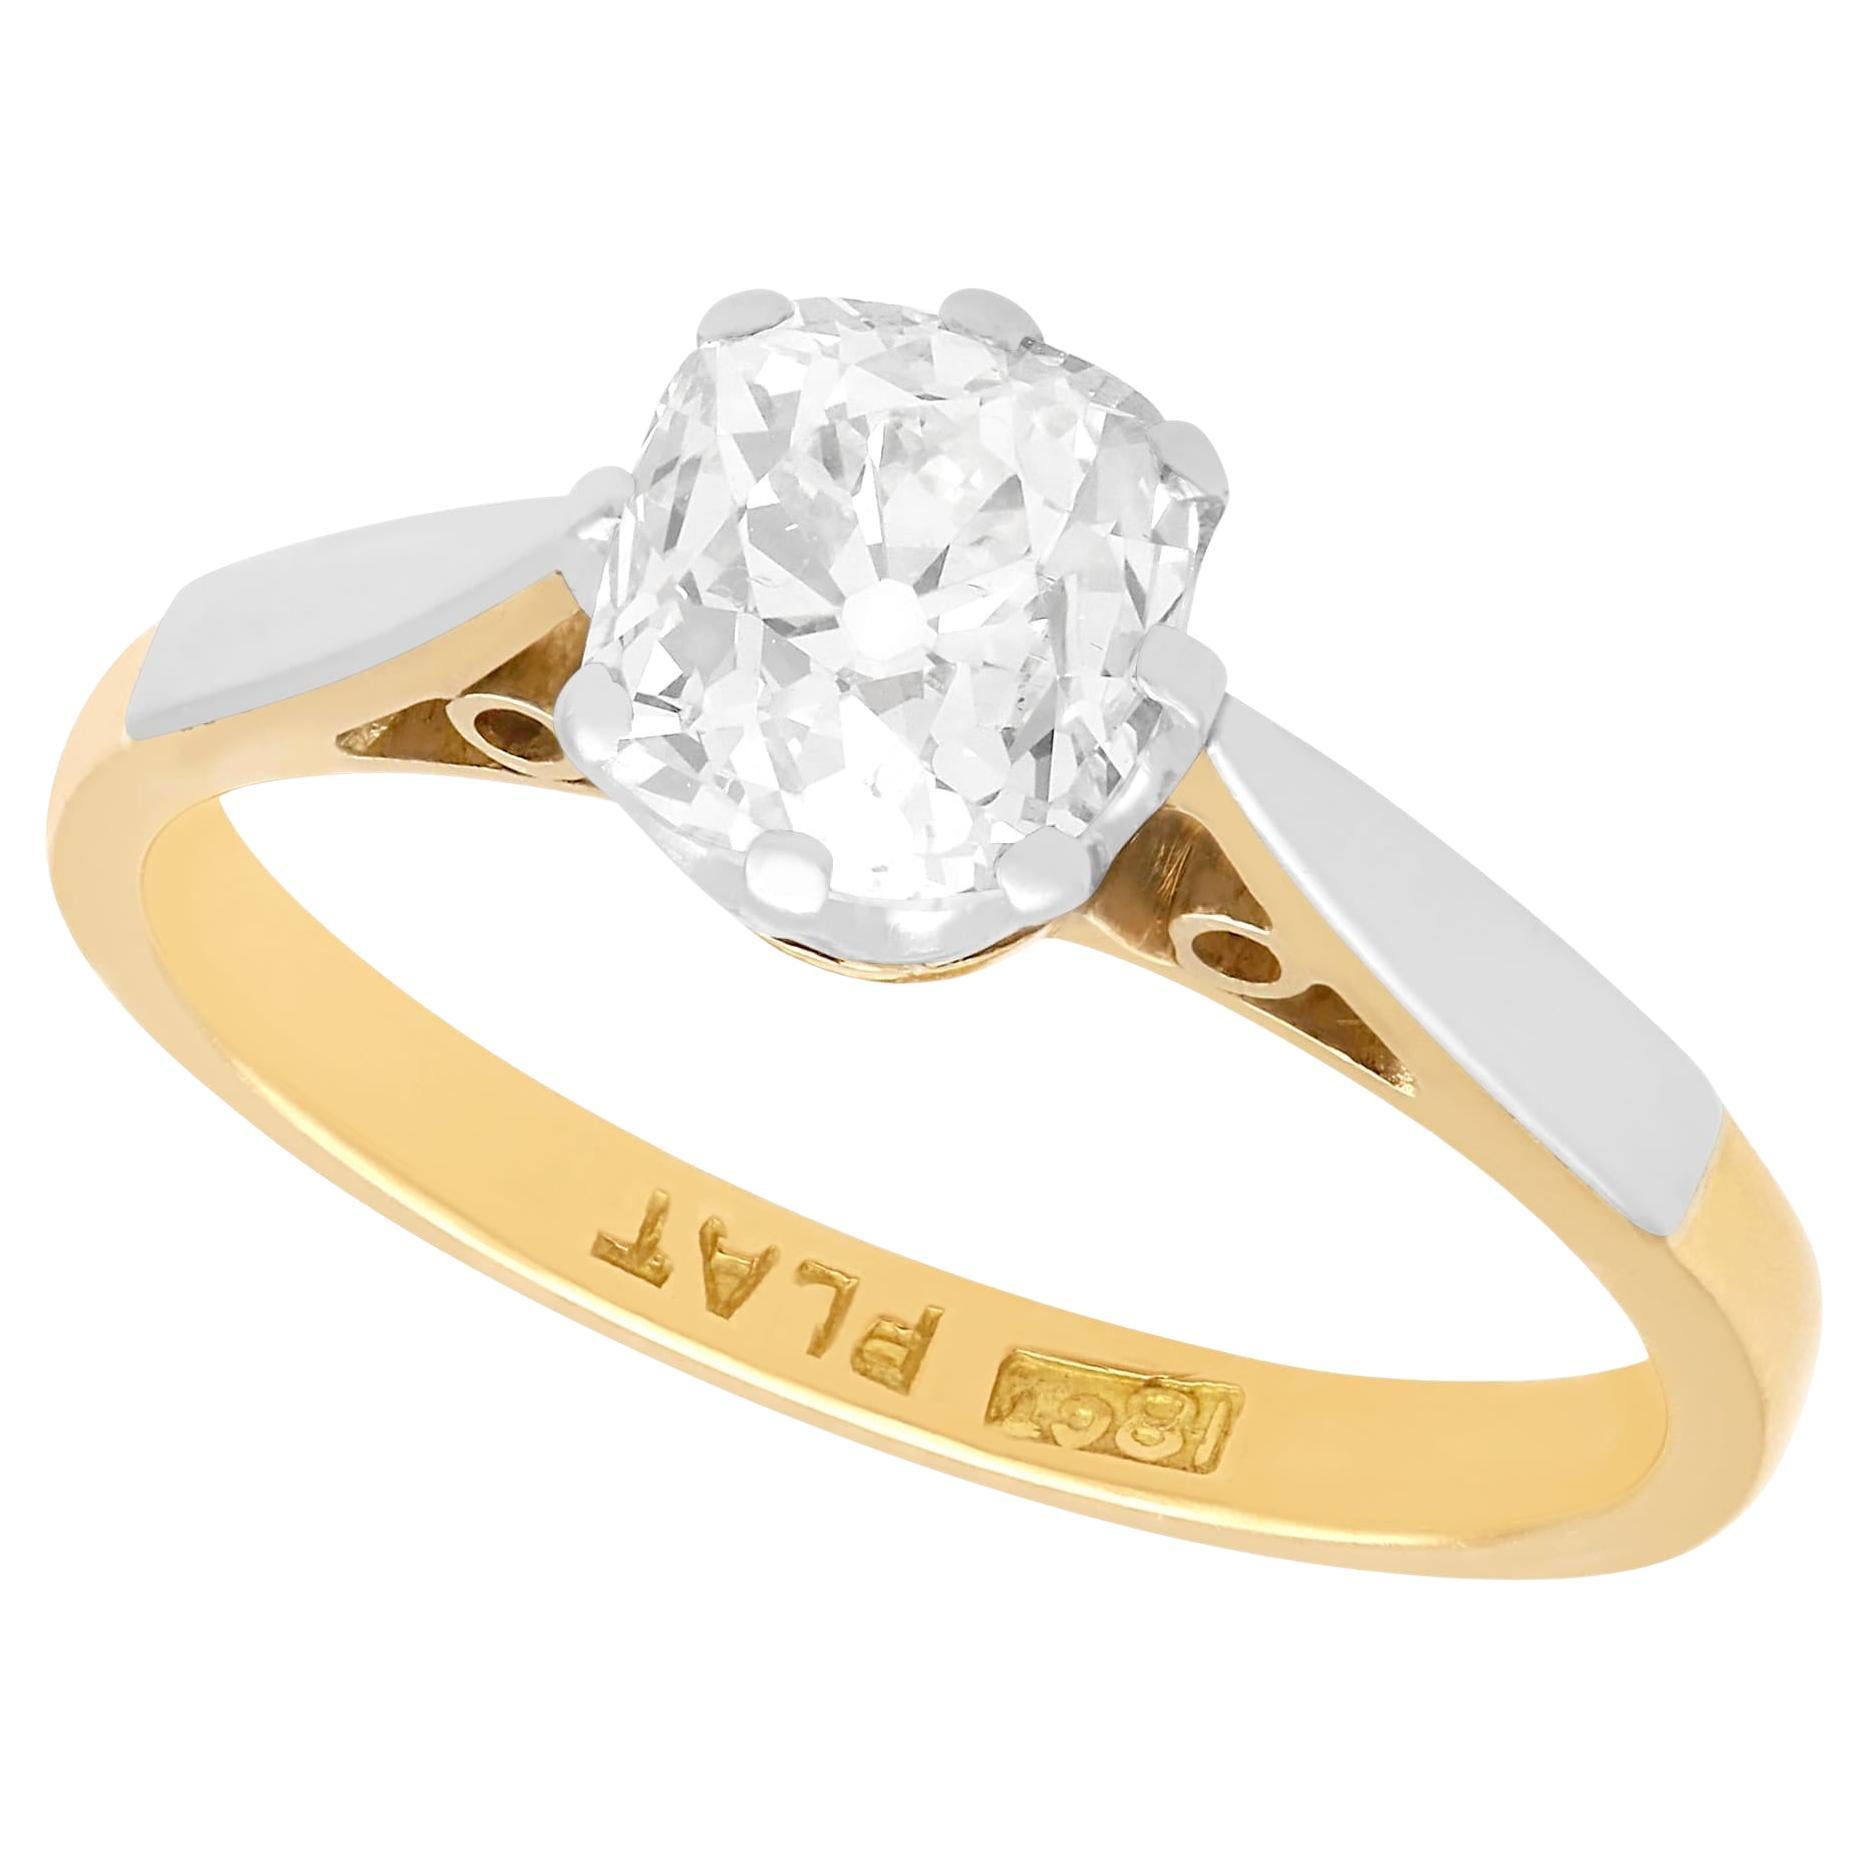 Antique 1.23 Carat Diamond and 18k Yellow Gold Solitaire Ring, circa 1910